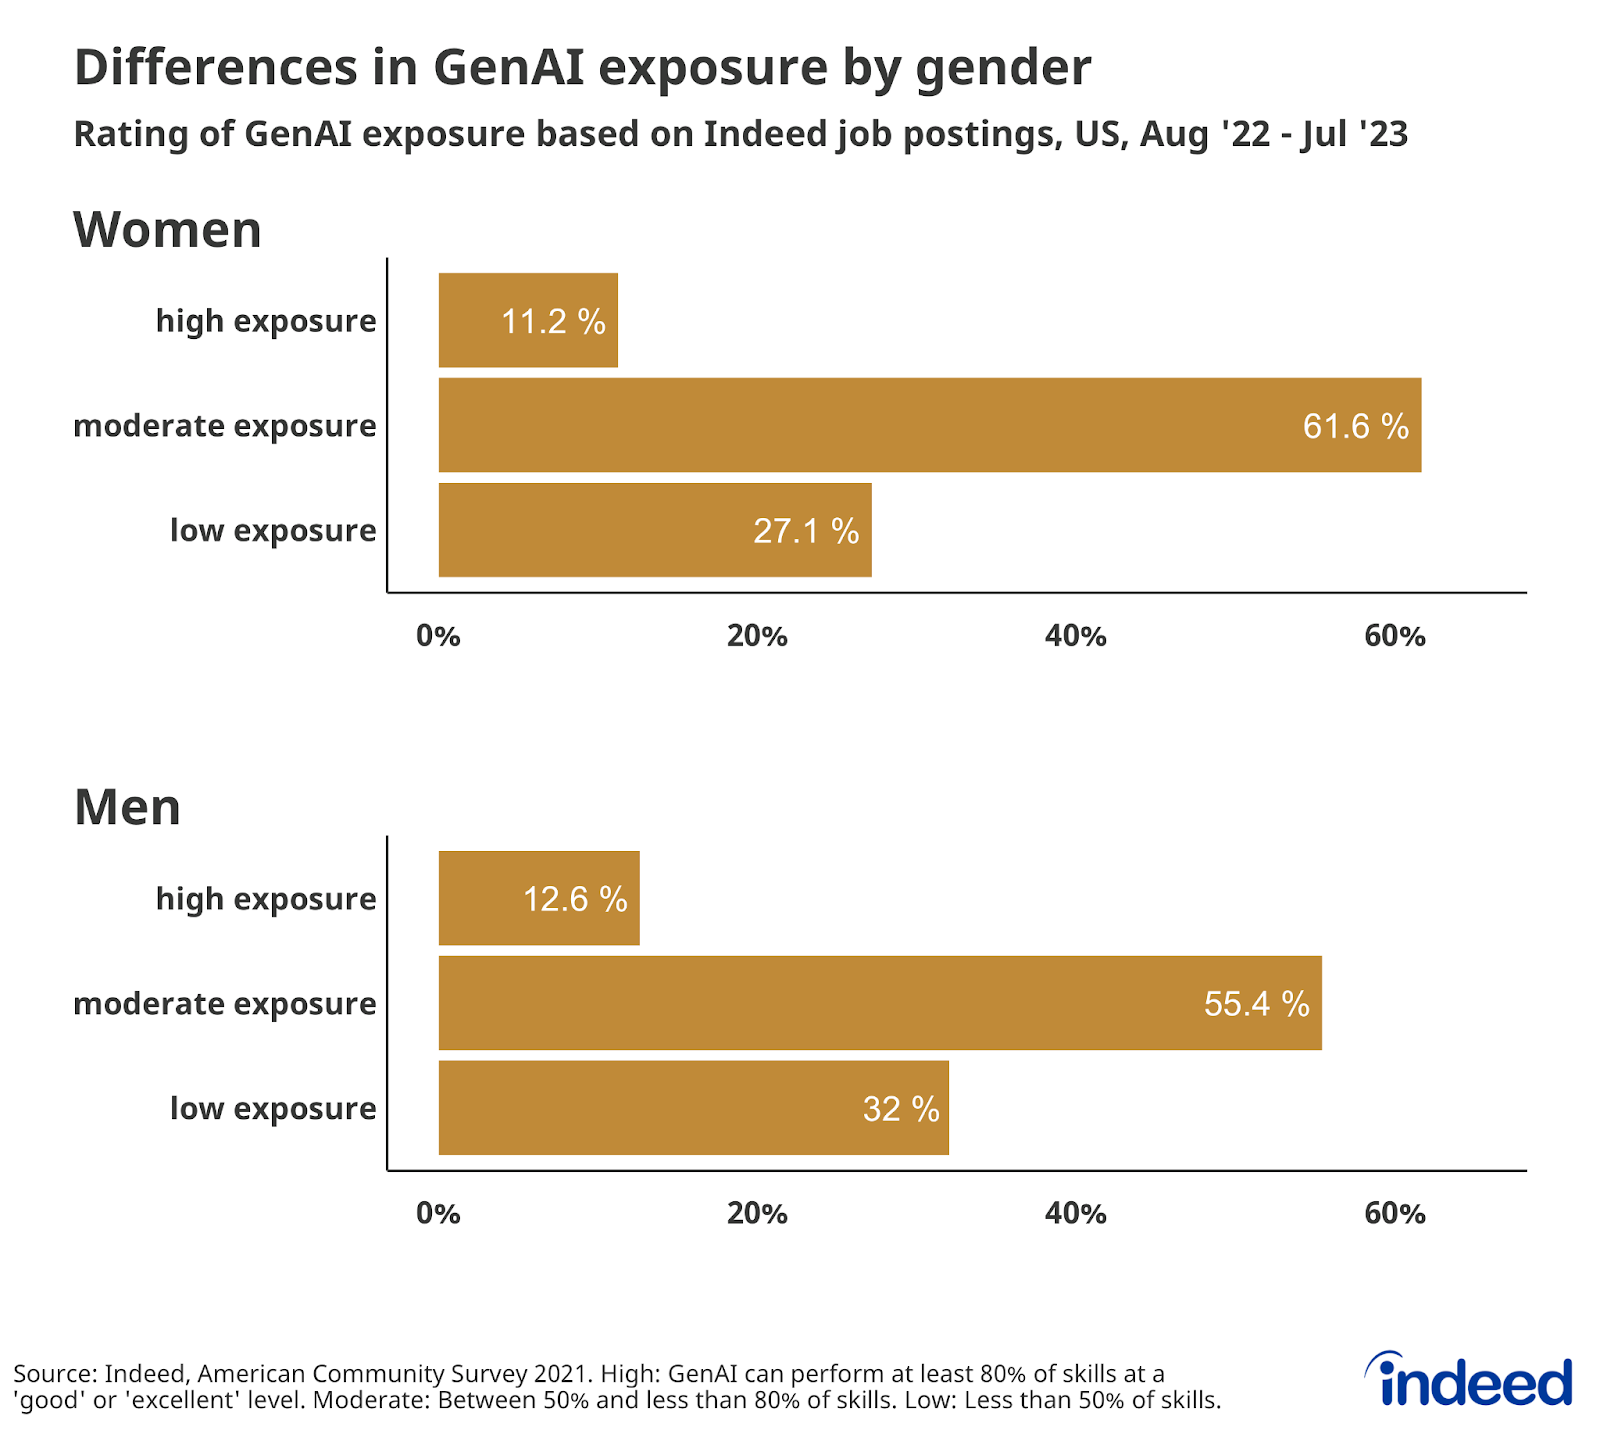 A series of two bar graphs titled "Differences in GenAI exposure by gender," shows the rating of GenAI exposure of job postings (by high, moderate, and low exposure) for both men and women. 